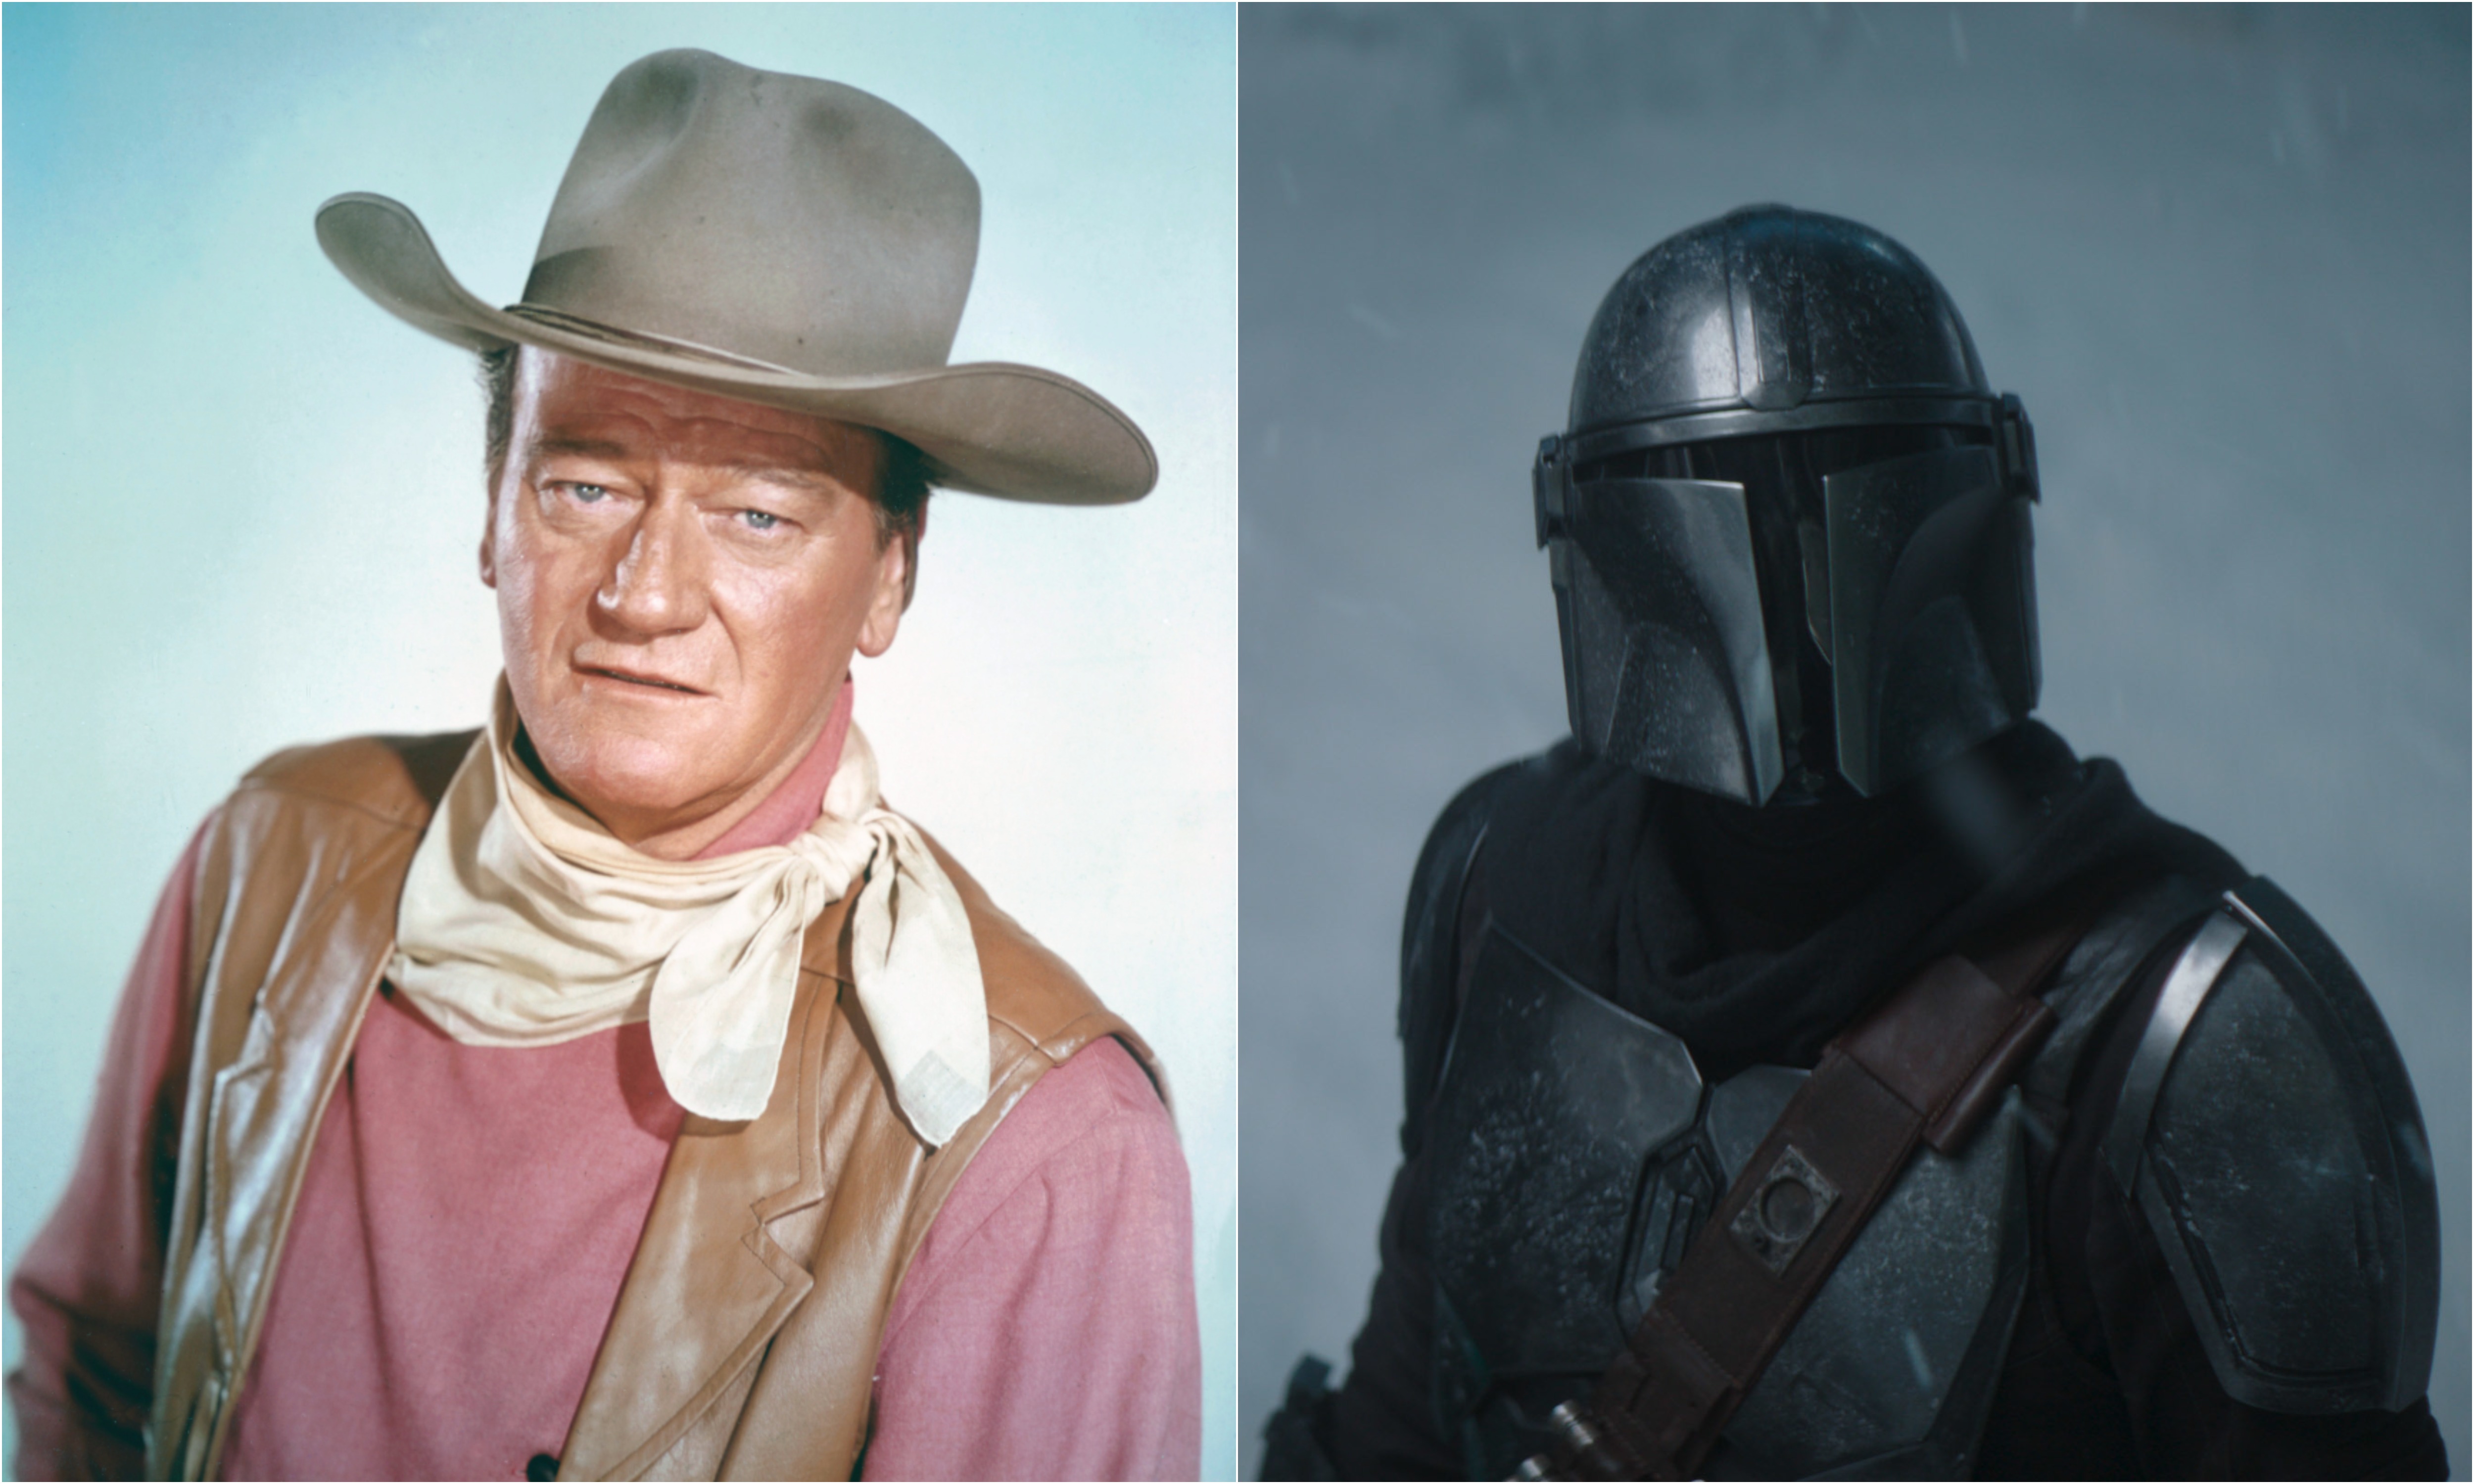 A joined photo of John Wayne and Pedro Pascal in The Mandalorian